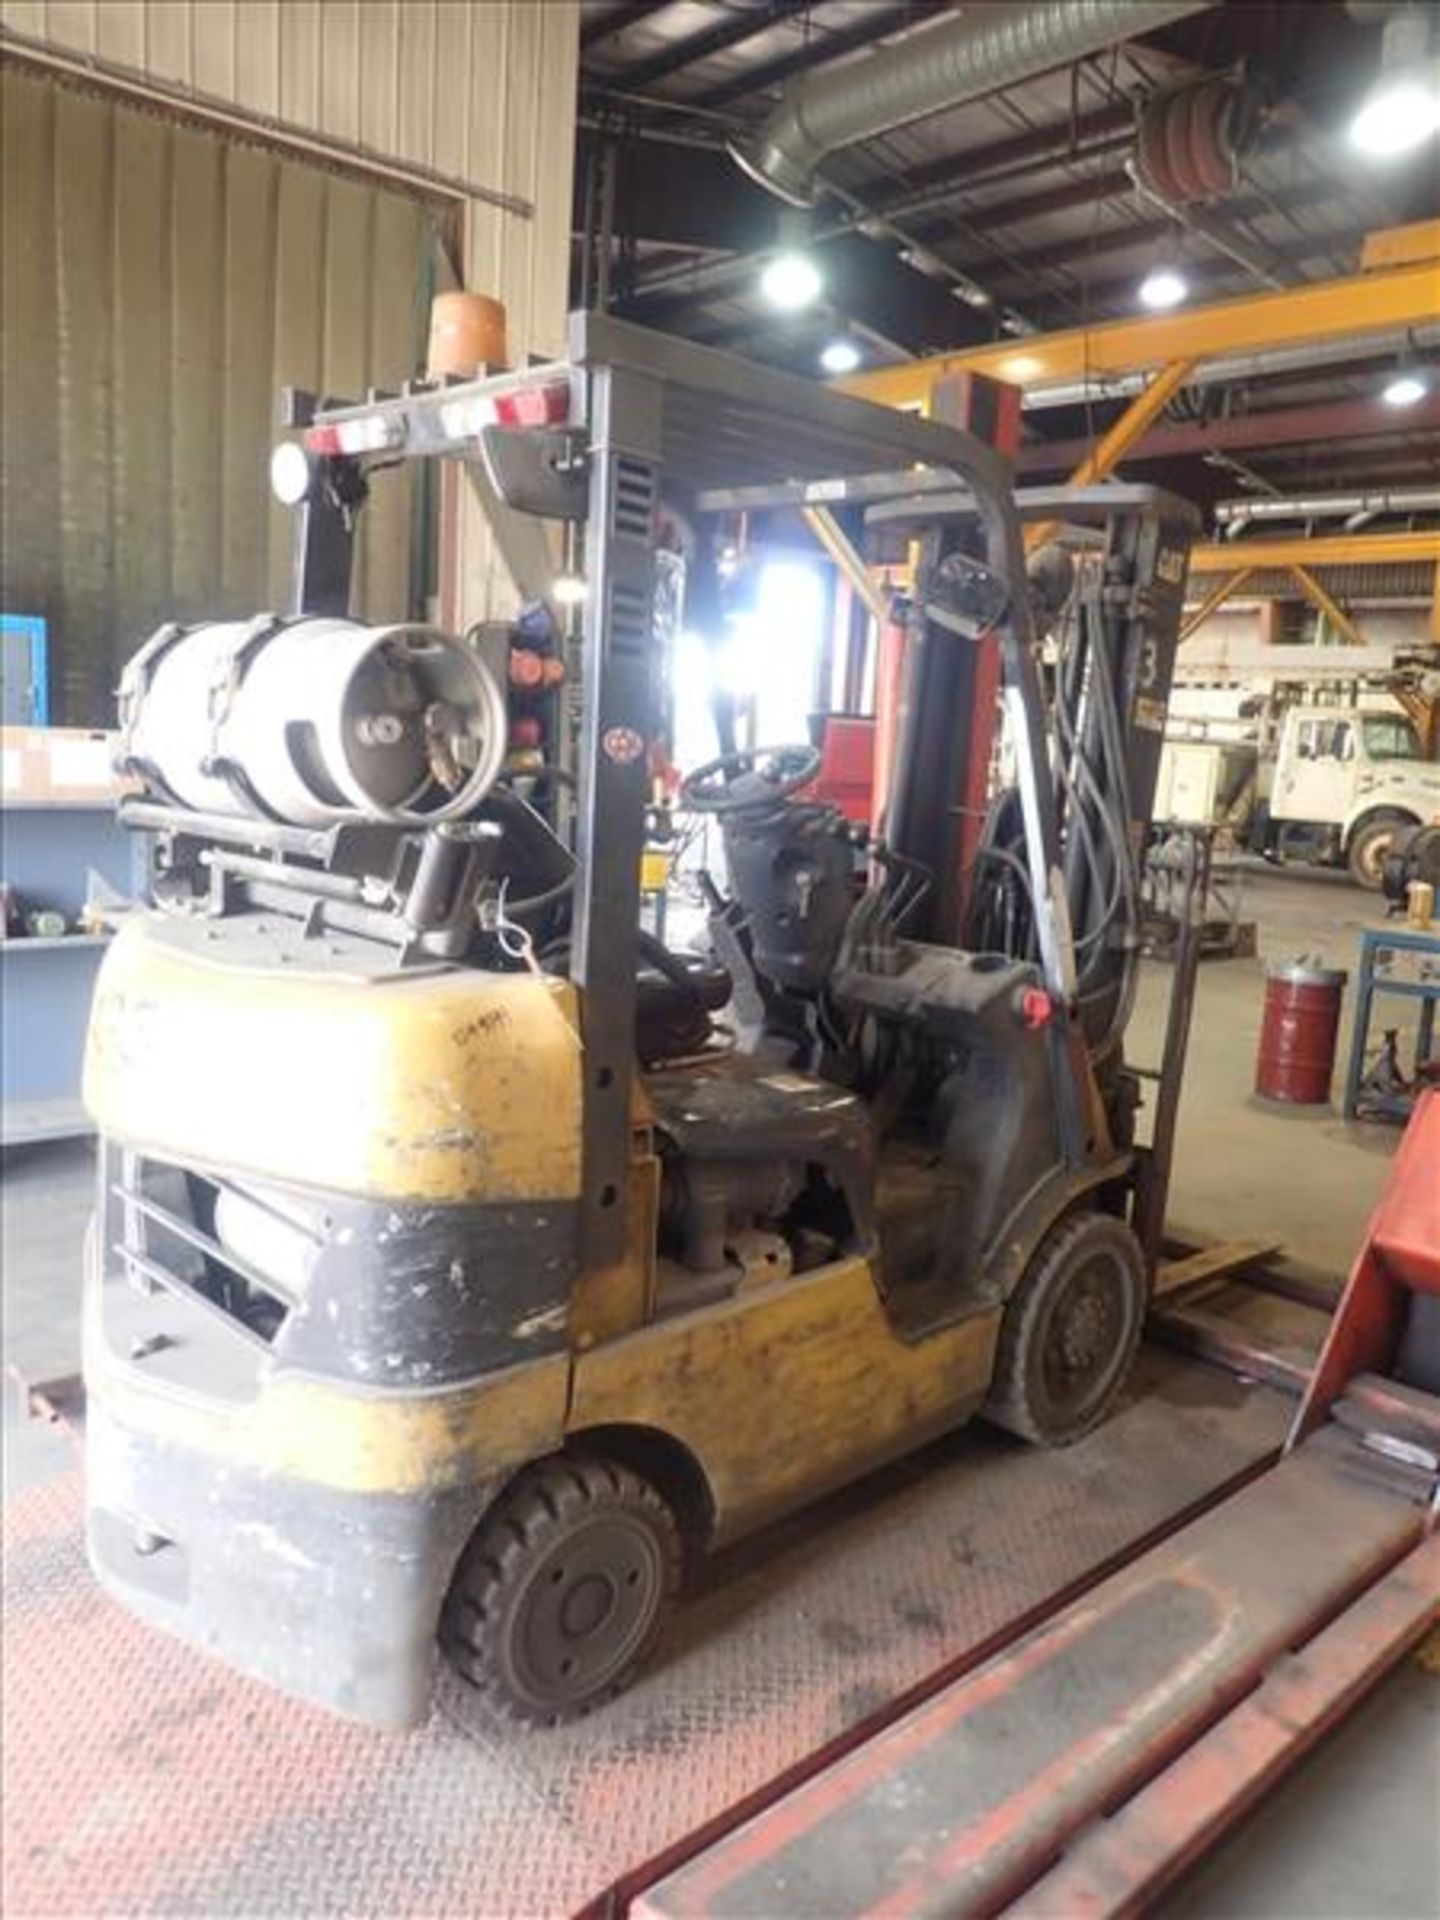 CAT forklift truck, mod. C5000, ser. no. N/A, propane, 2-stage, hour meter reads N/A (Tag 9099 Loc